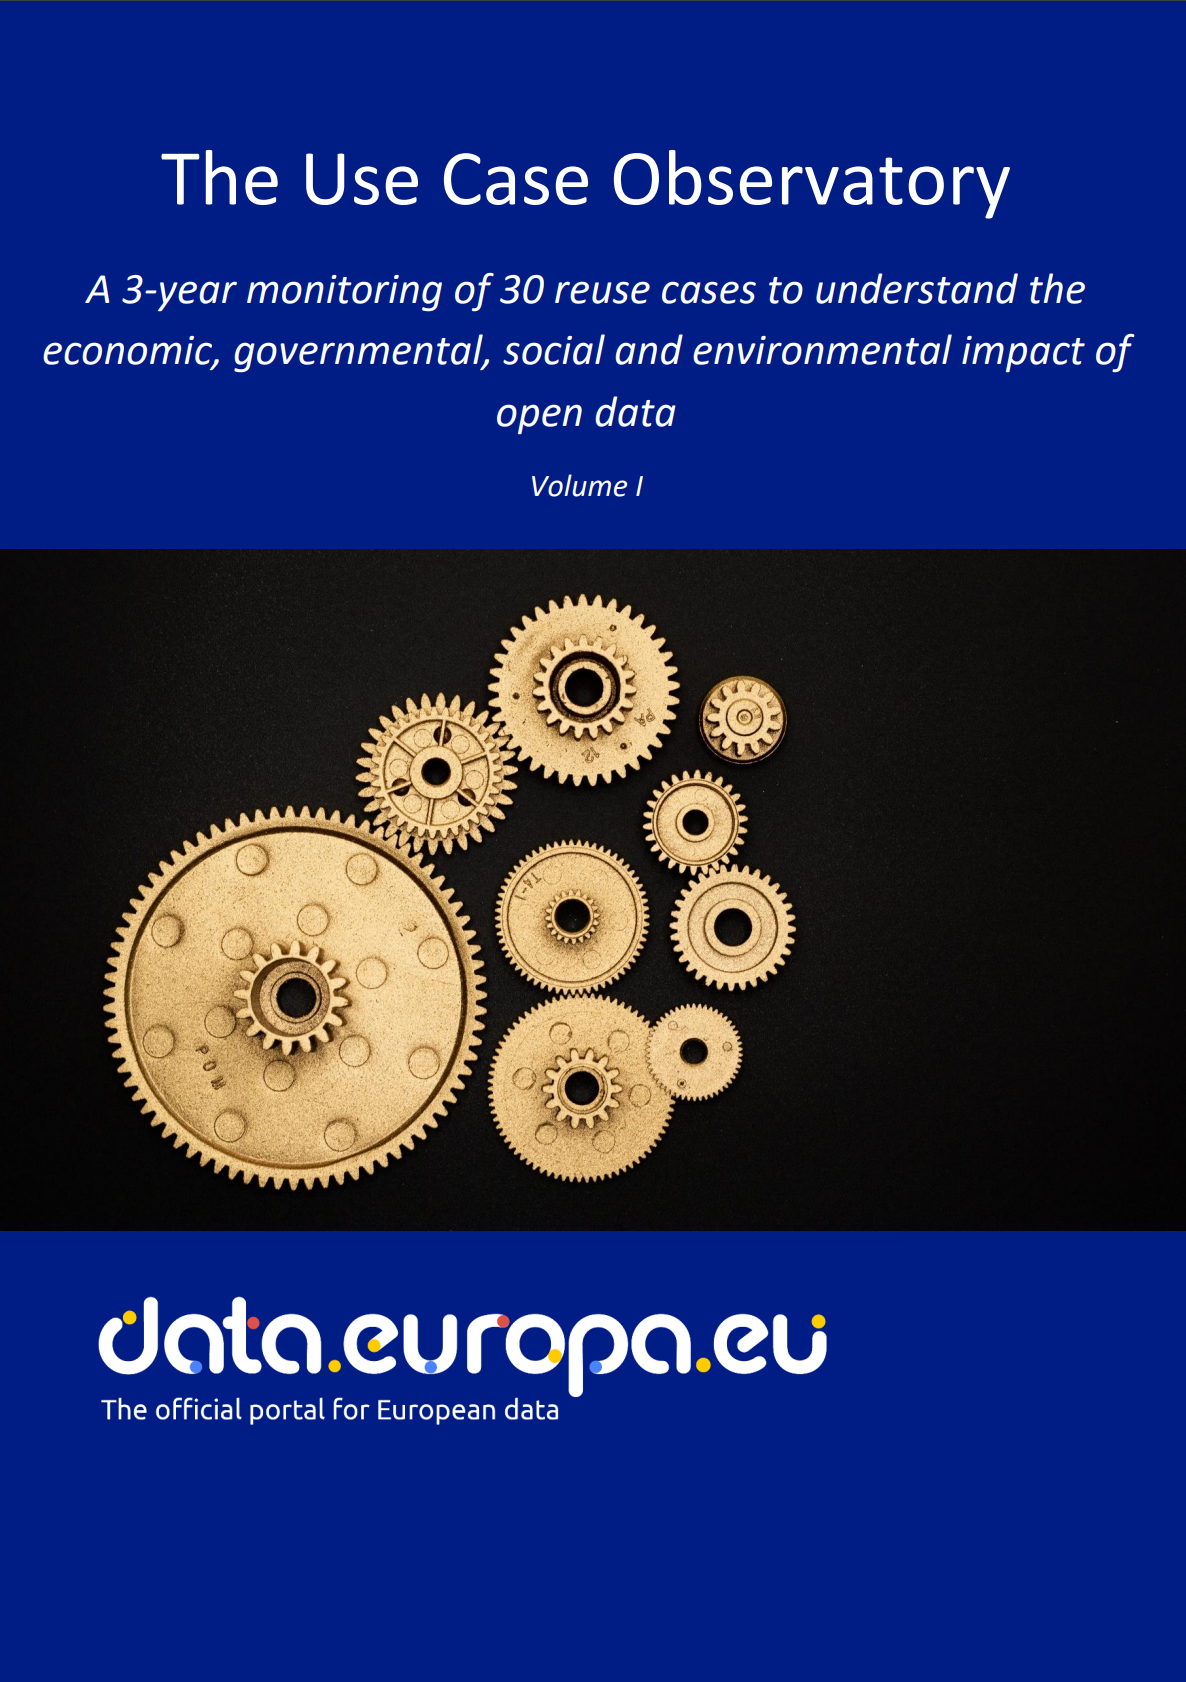 The use case observatory: A 3 year monitoring of 30 reuse cases to understand the economic, governmental, social, and environmental impact of open data - volume I